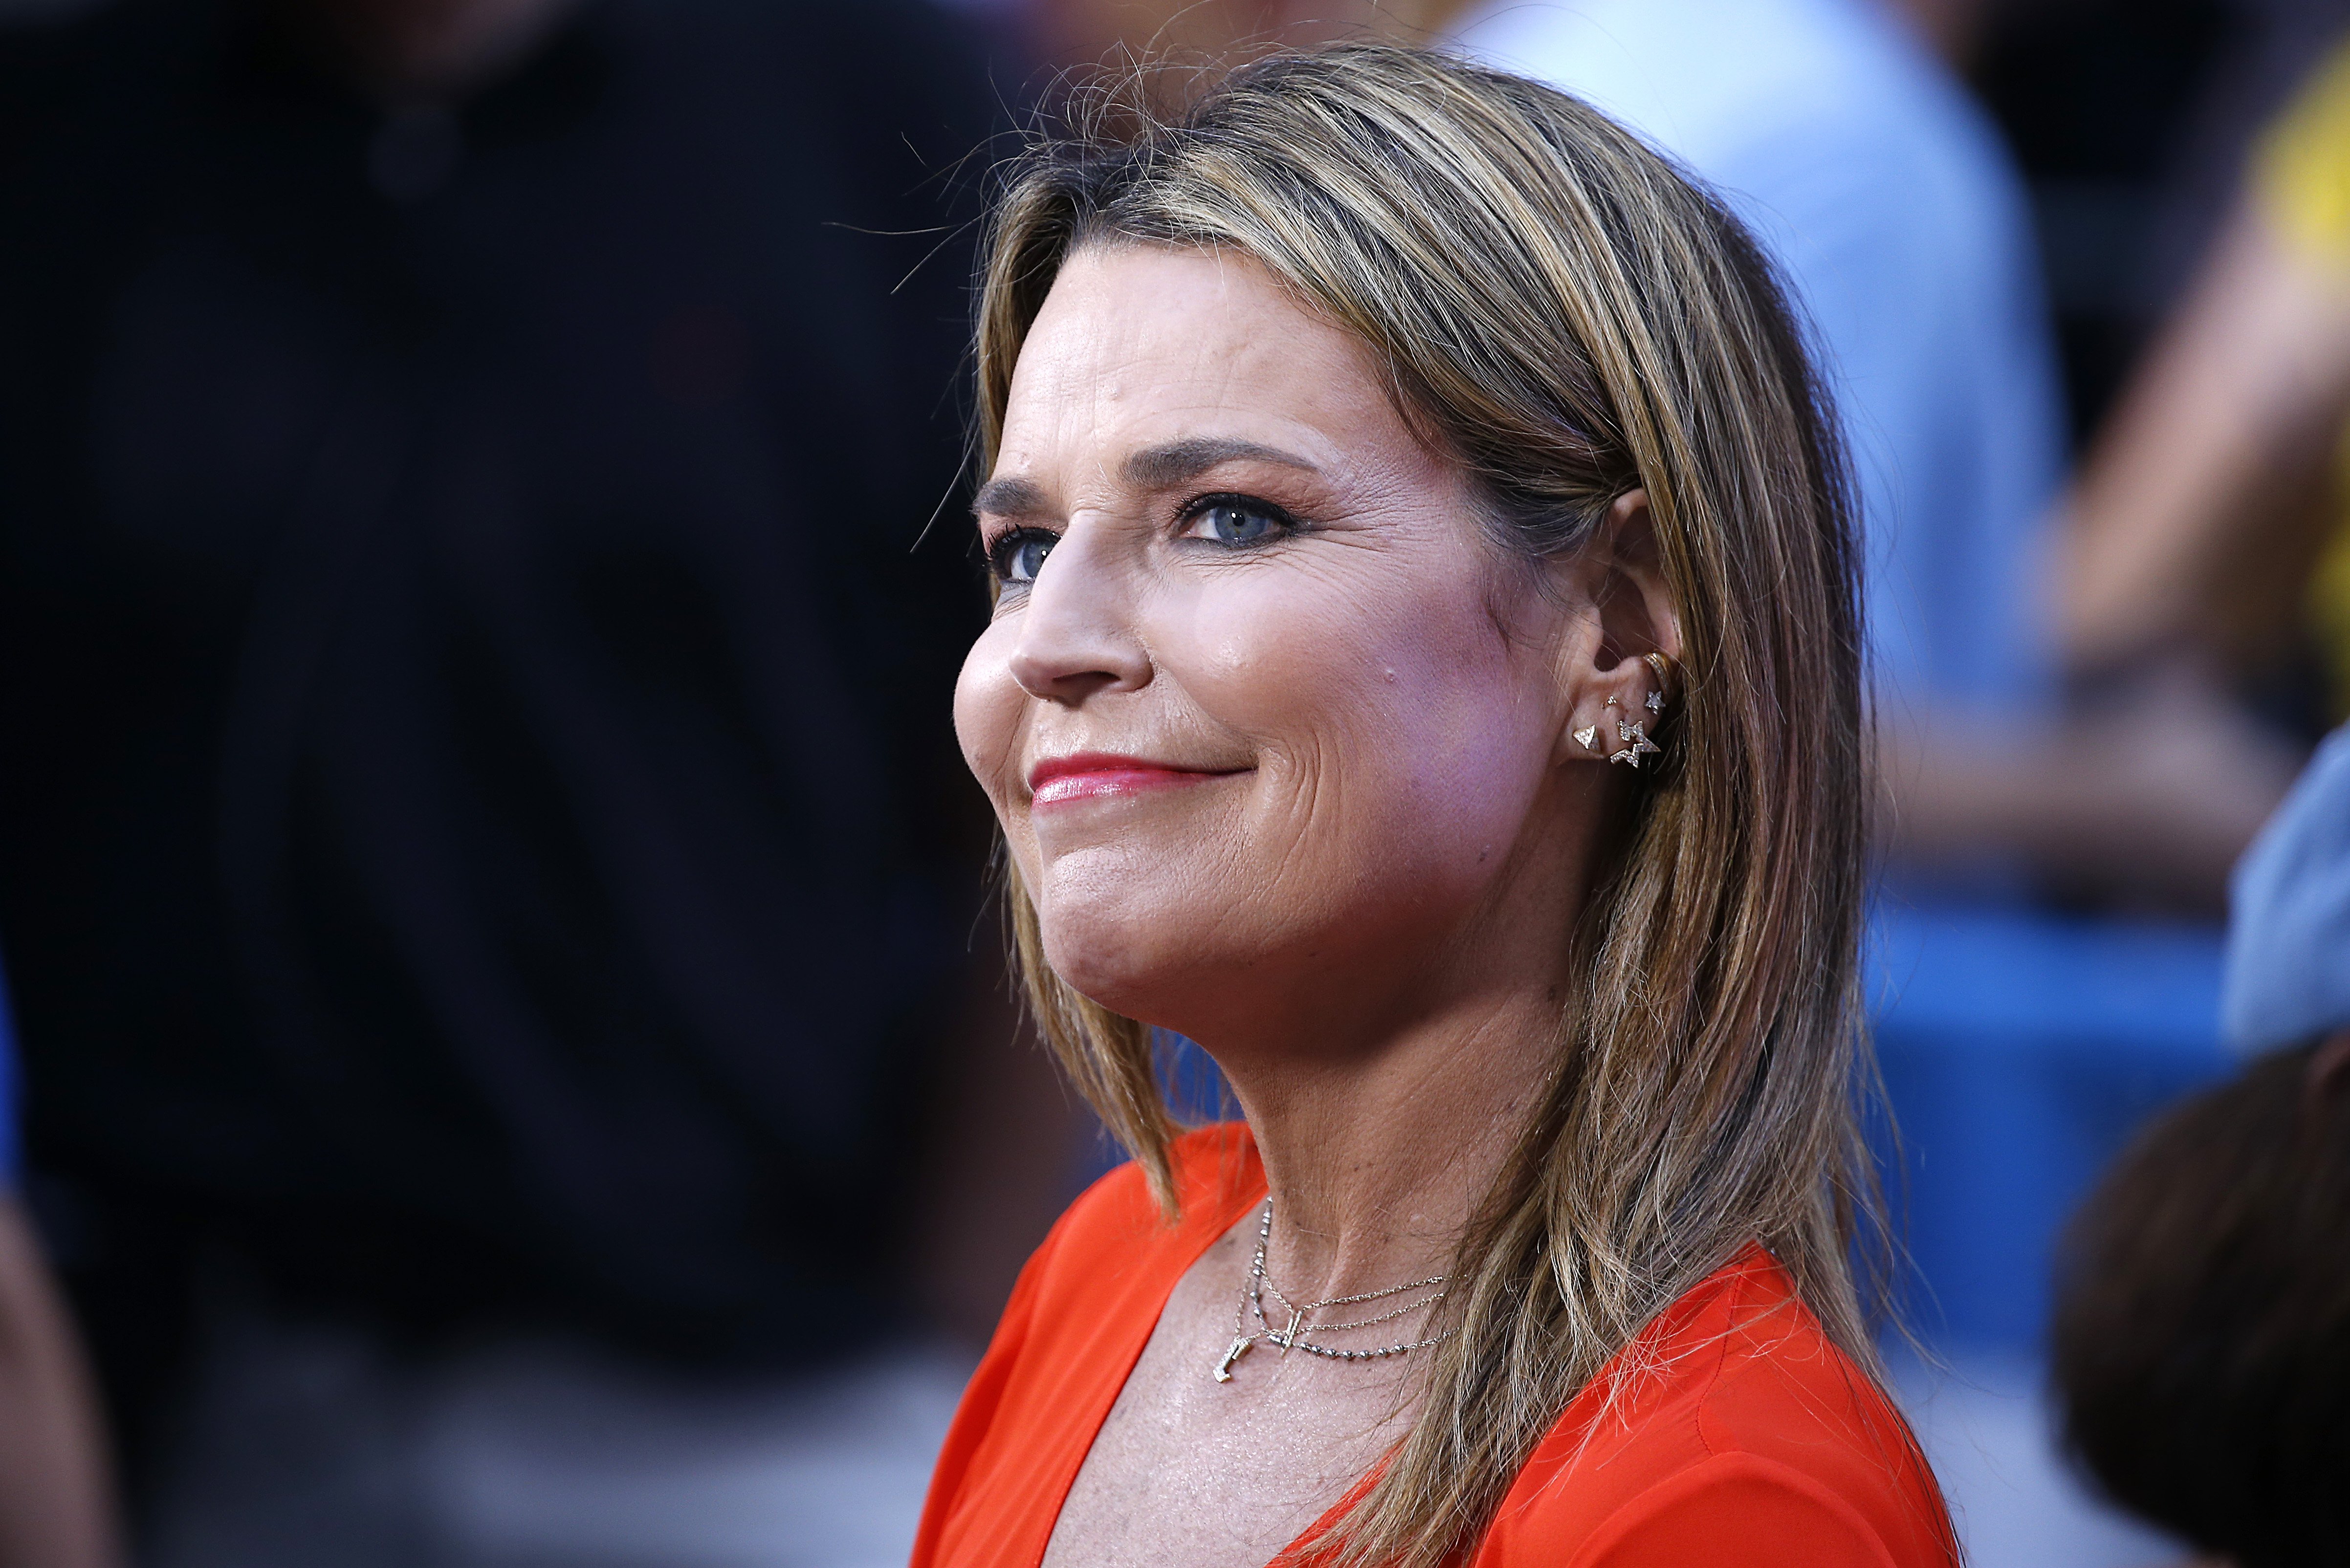 Savannah Guthrie attends as Dierks Bentley performs on NBC's "Today" at Rockefeller Plaza on August 01, 2019  | Photo: GettyImages